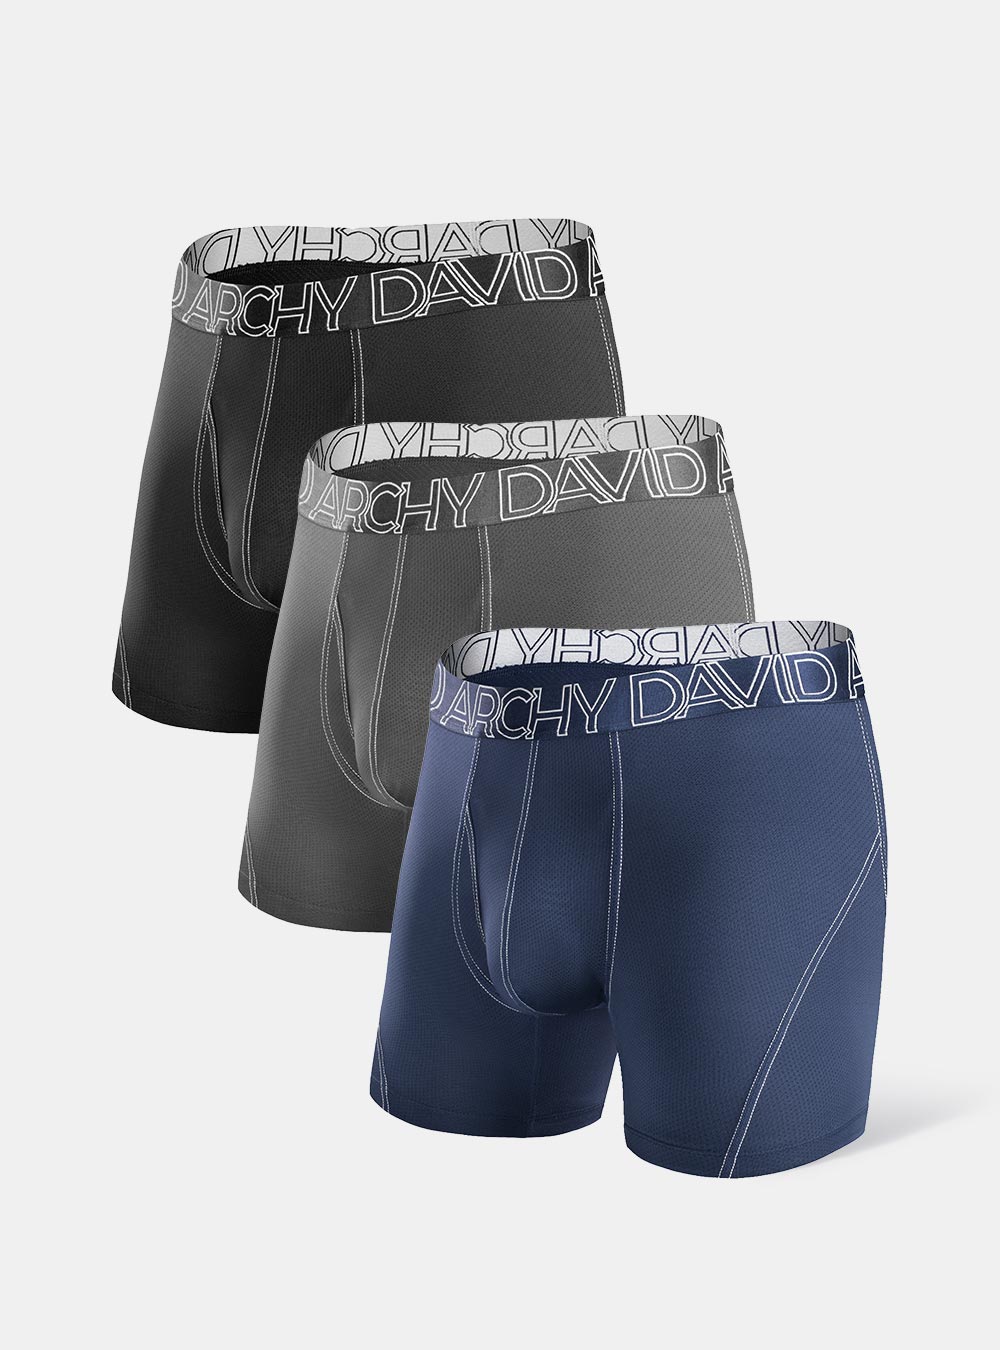 3 Packs Quick Dry Sports Boxer Briefs